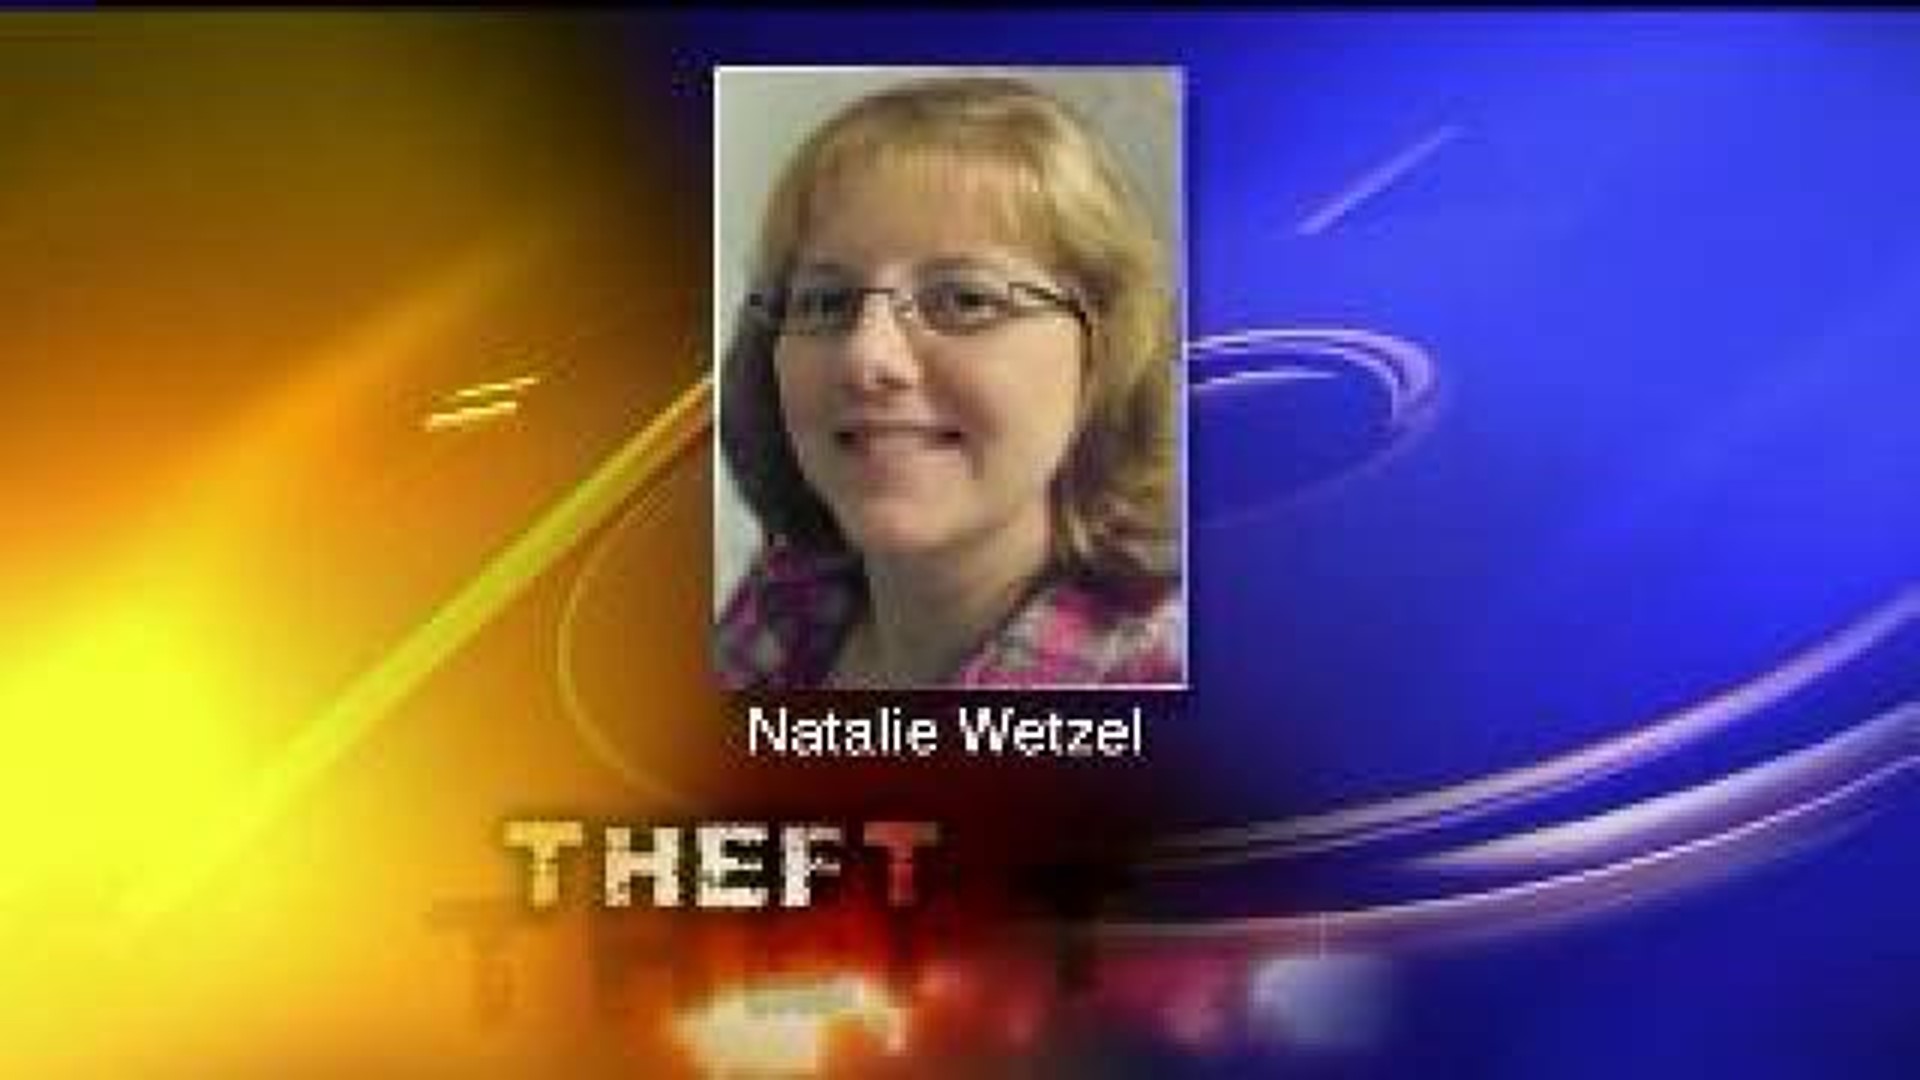 Former Notary Allegedly Stole From Clients